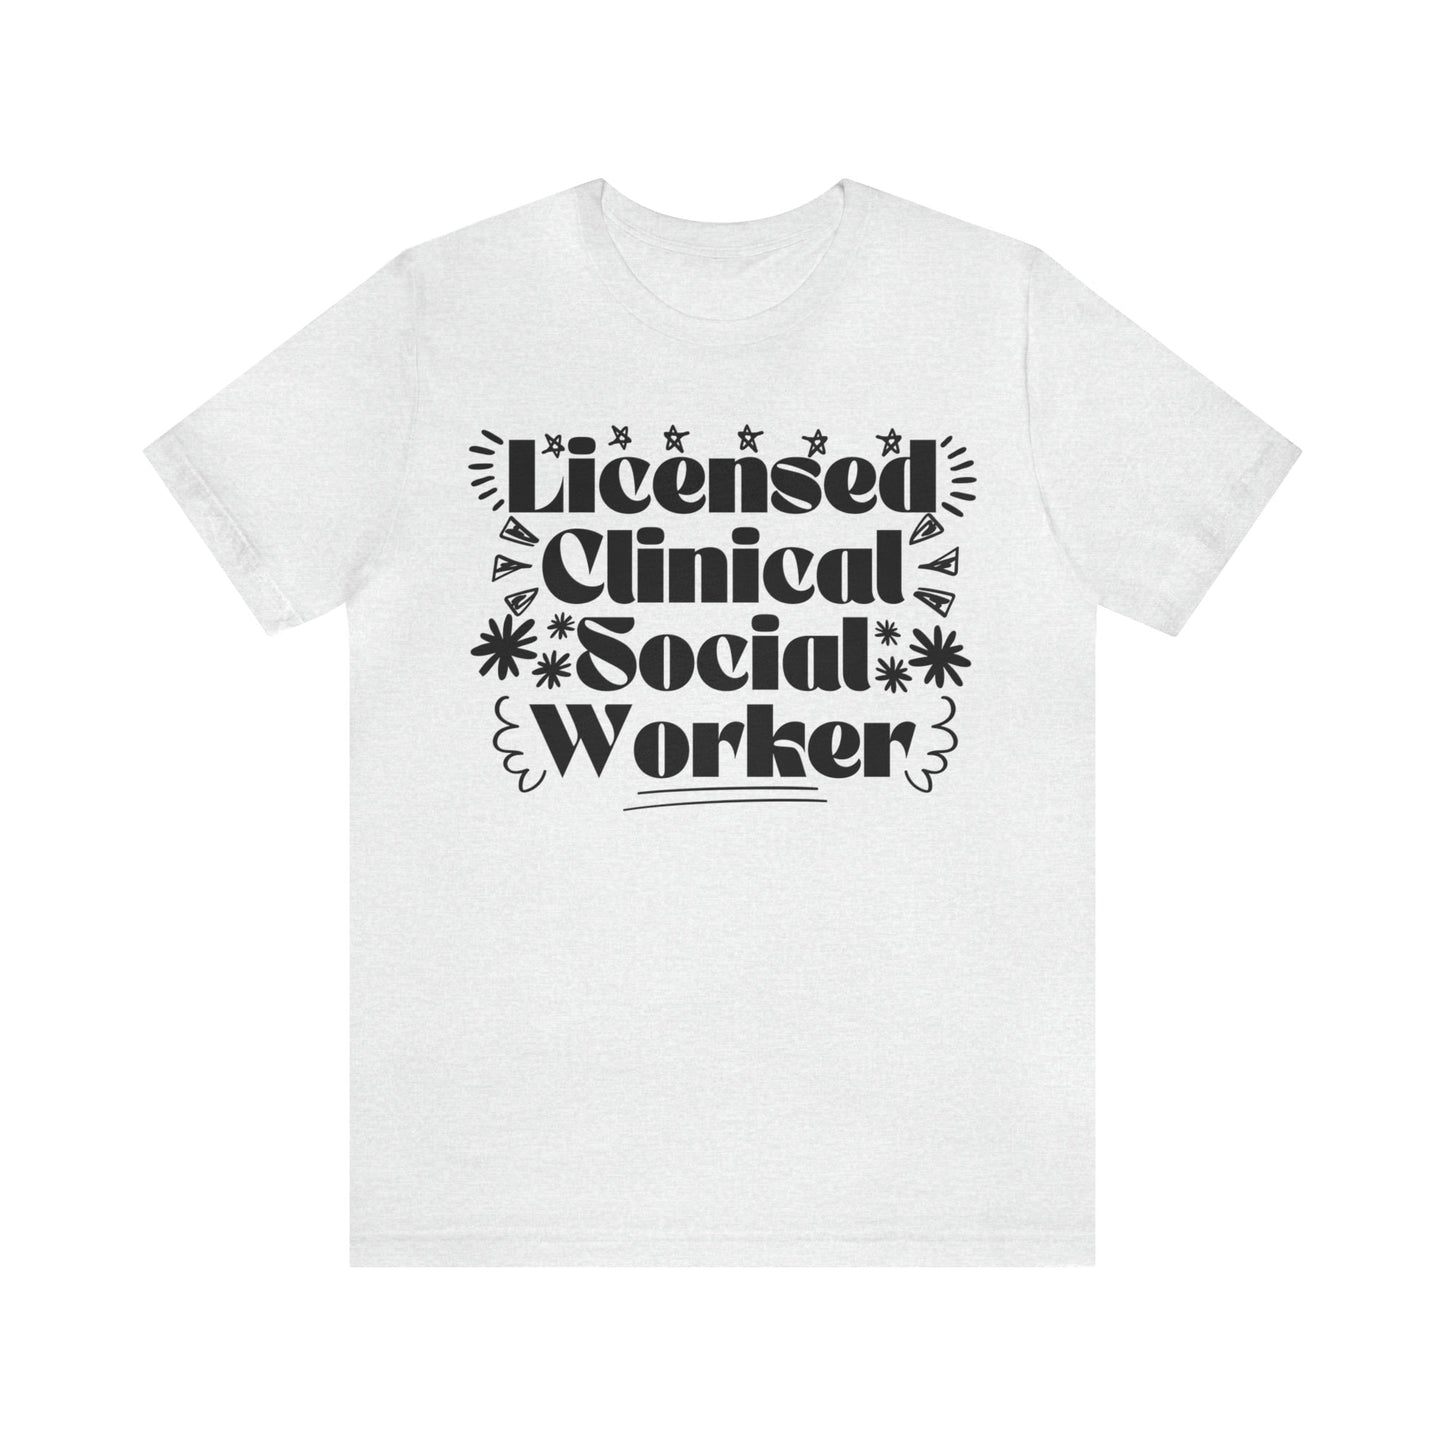 Licensed Clinical Social Worker Tshirt, LCSW Tee, Back To School Outfit, first Day Of School, Minimalist Aesthetic, Meet The Staff counselor